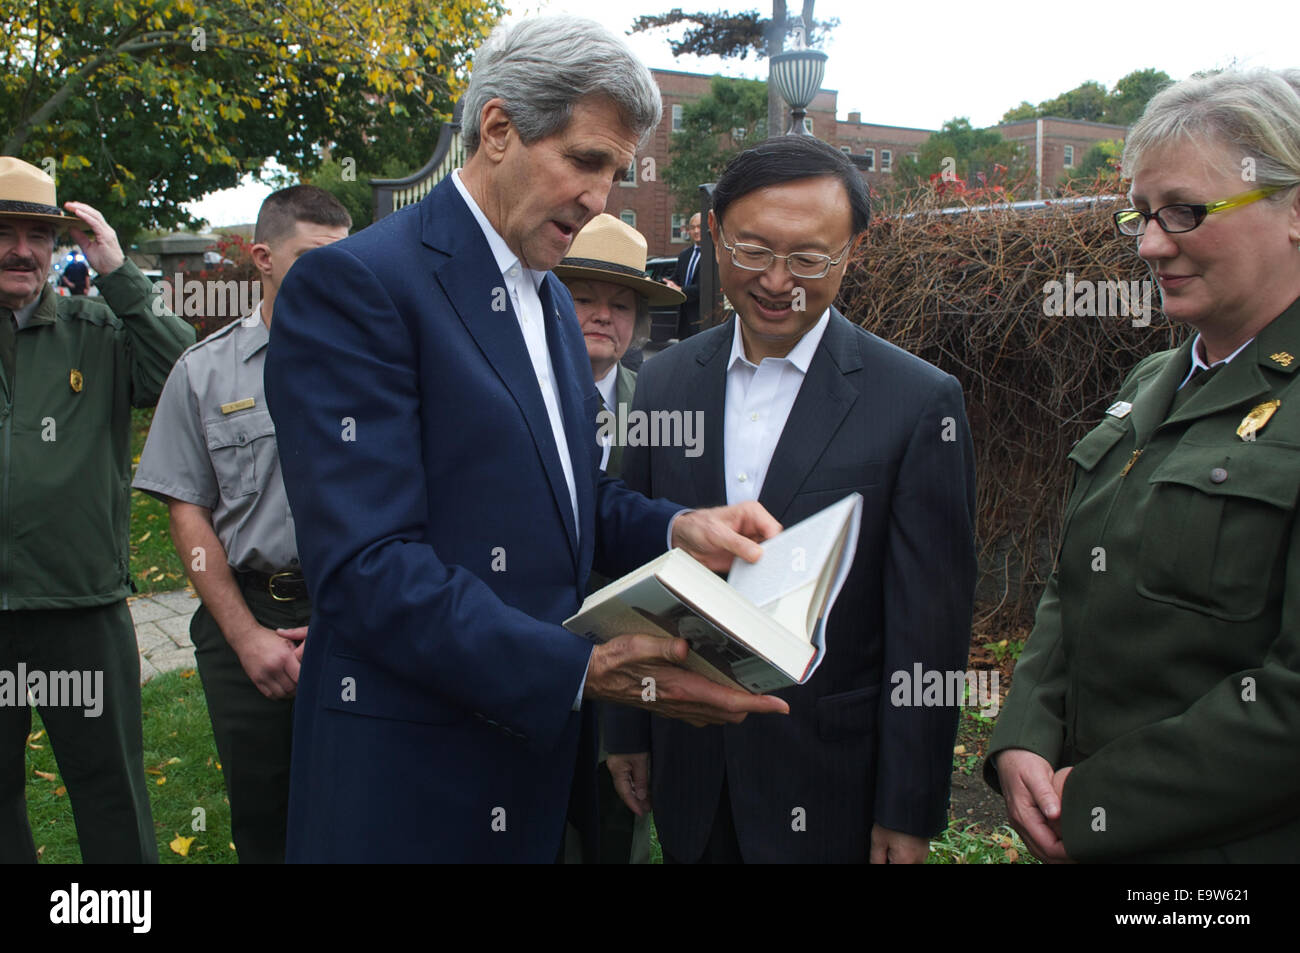 U.S. Secretary of State John Kerry presents Chinese State Councilor Yang Jiechi with an autographed copy of the John Adams biography by historian David McCullough after a tour of the Adams National Historical Site in Quincy, Massachusetts, following a ser Stock Photo